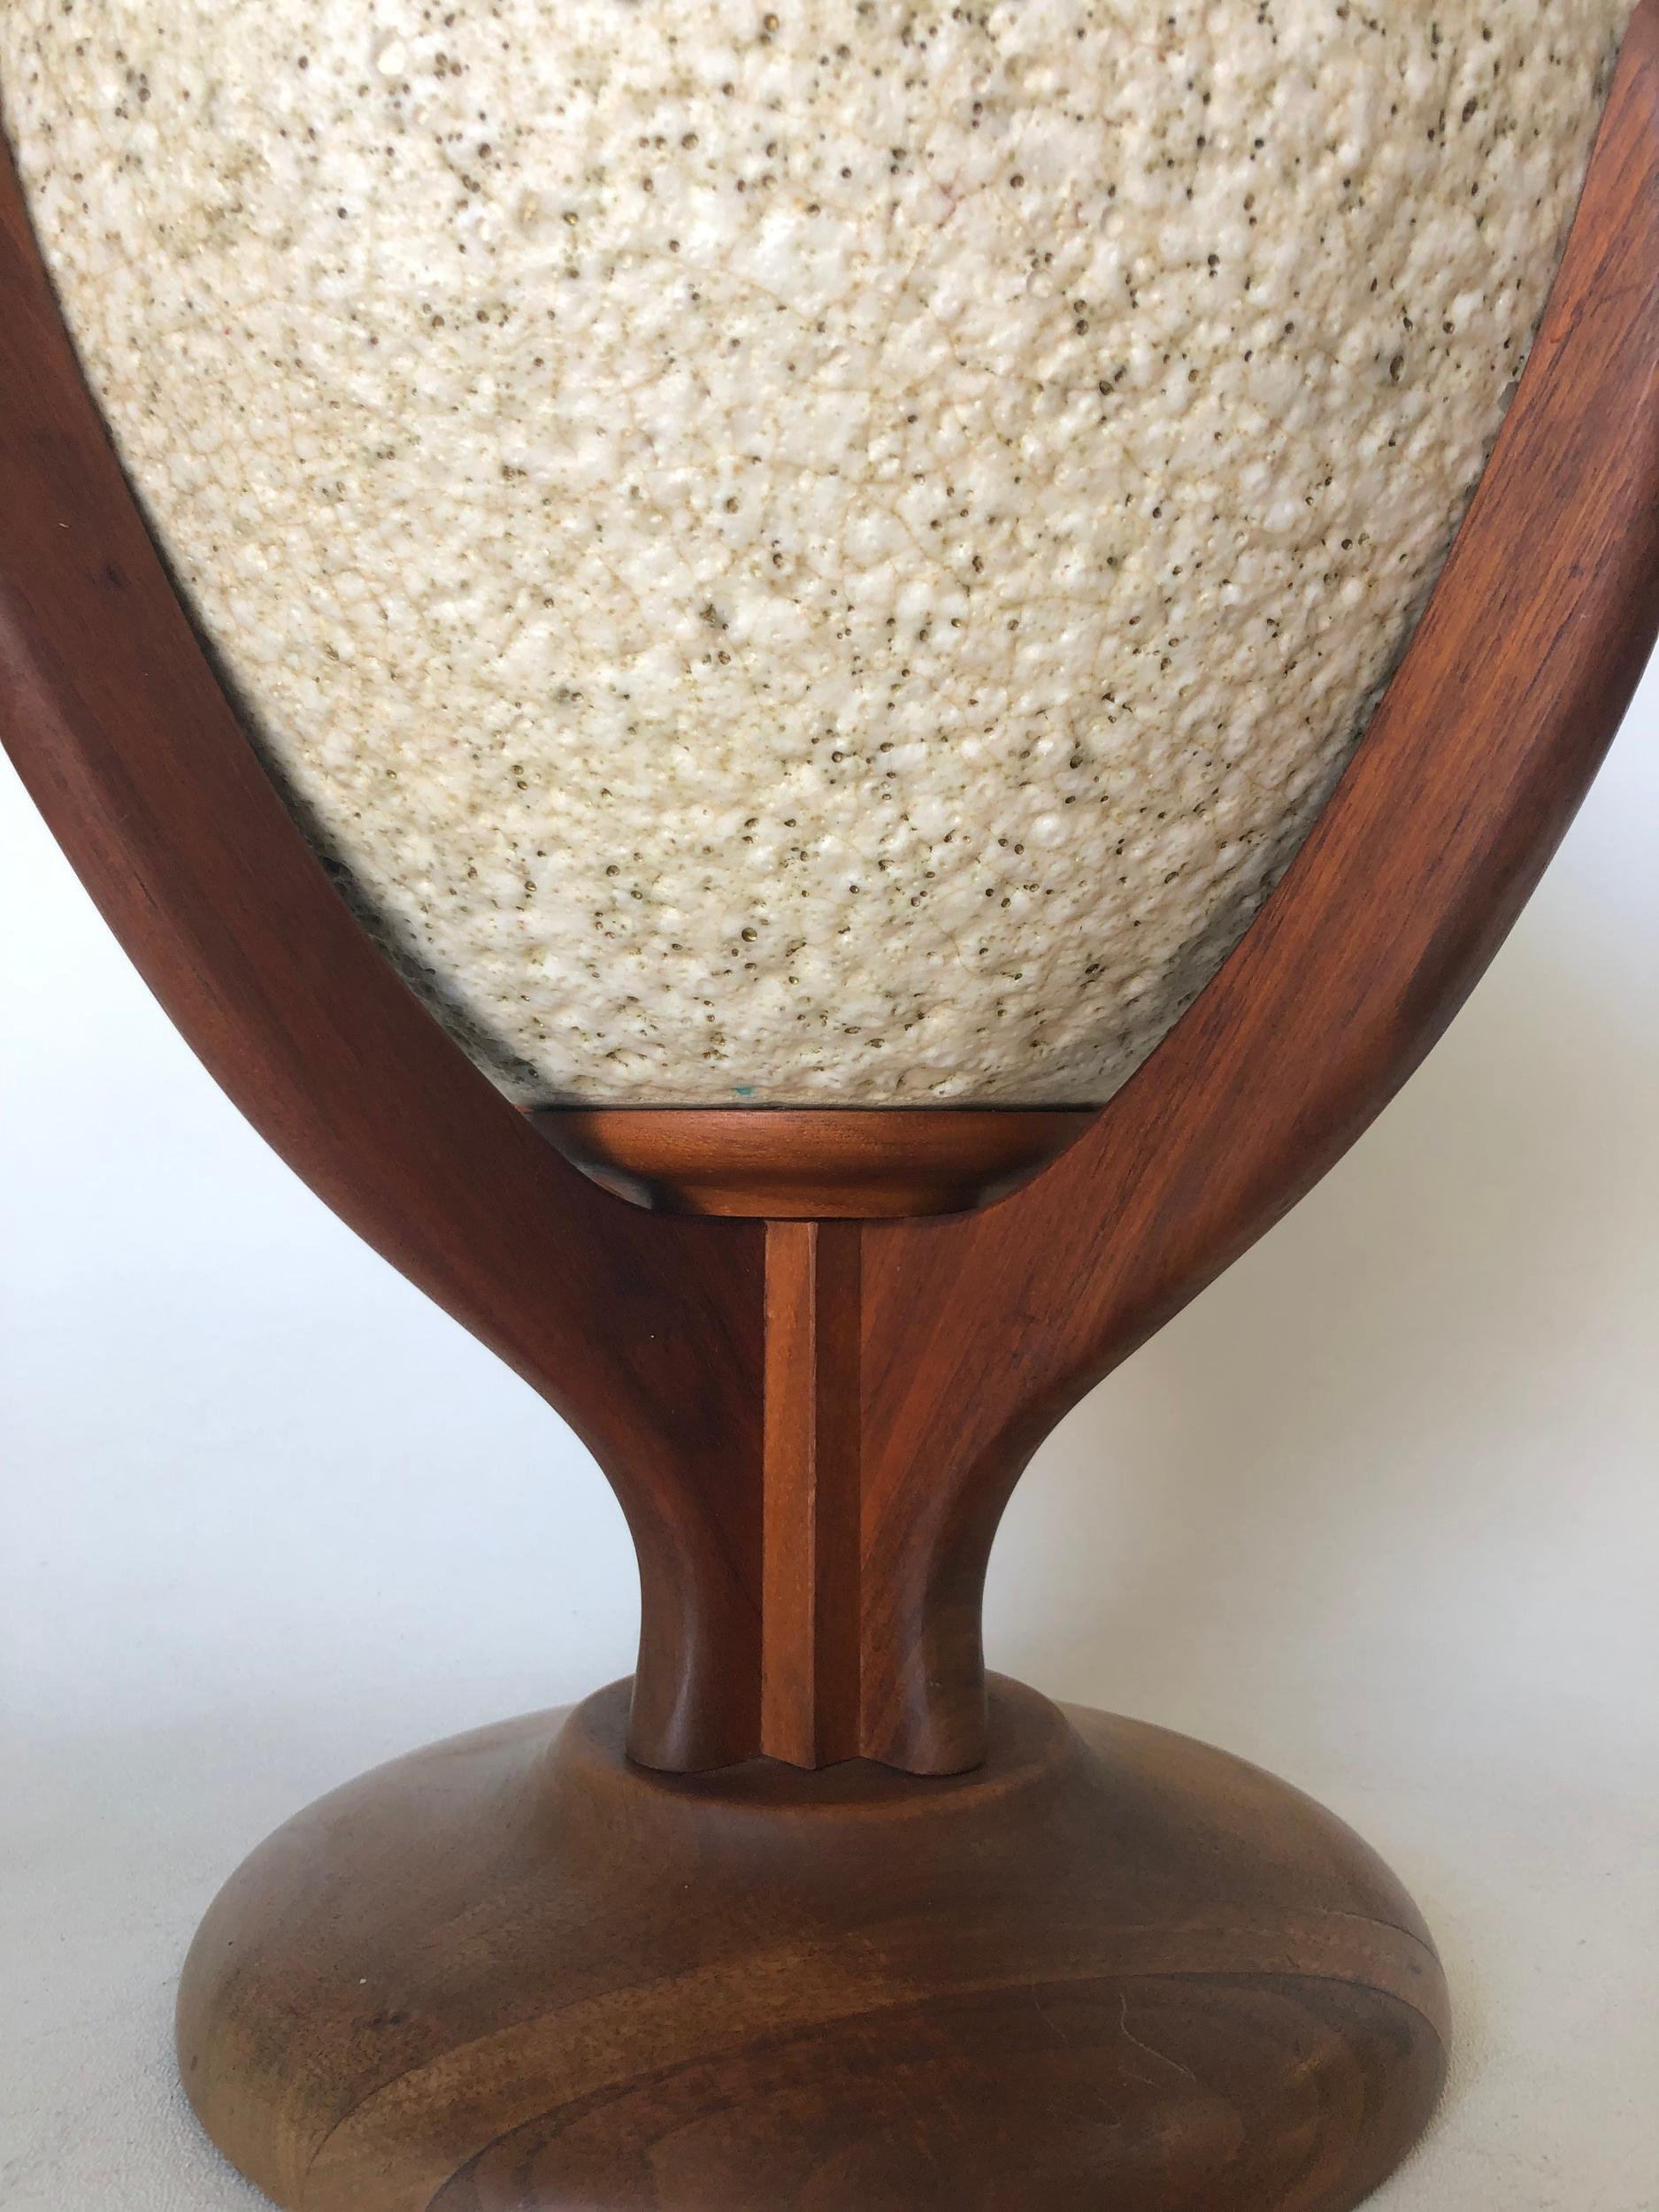 American Atomic Age Pebble Stone and Teak Table Lamp For Sale